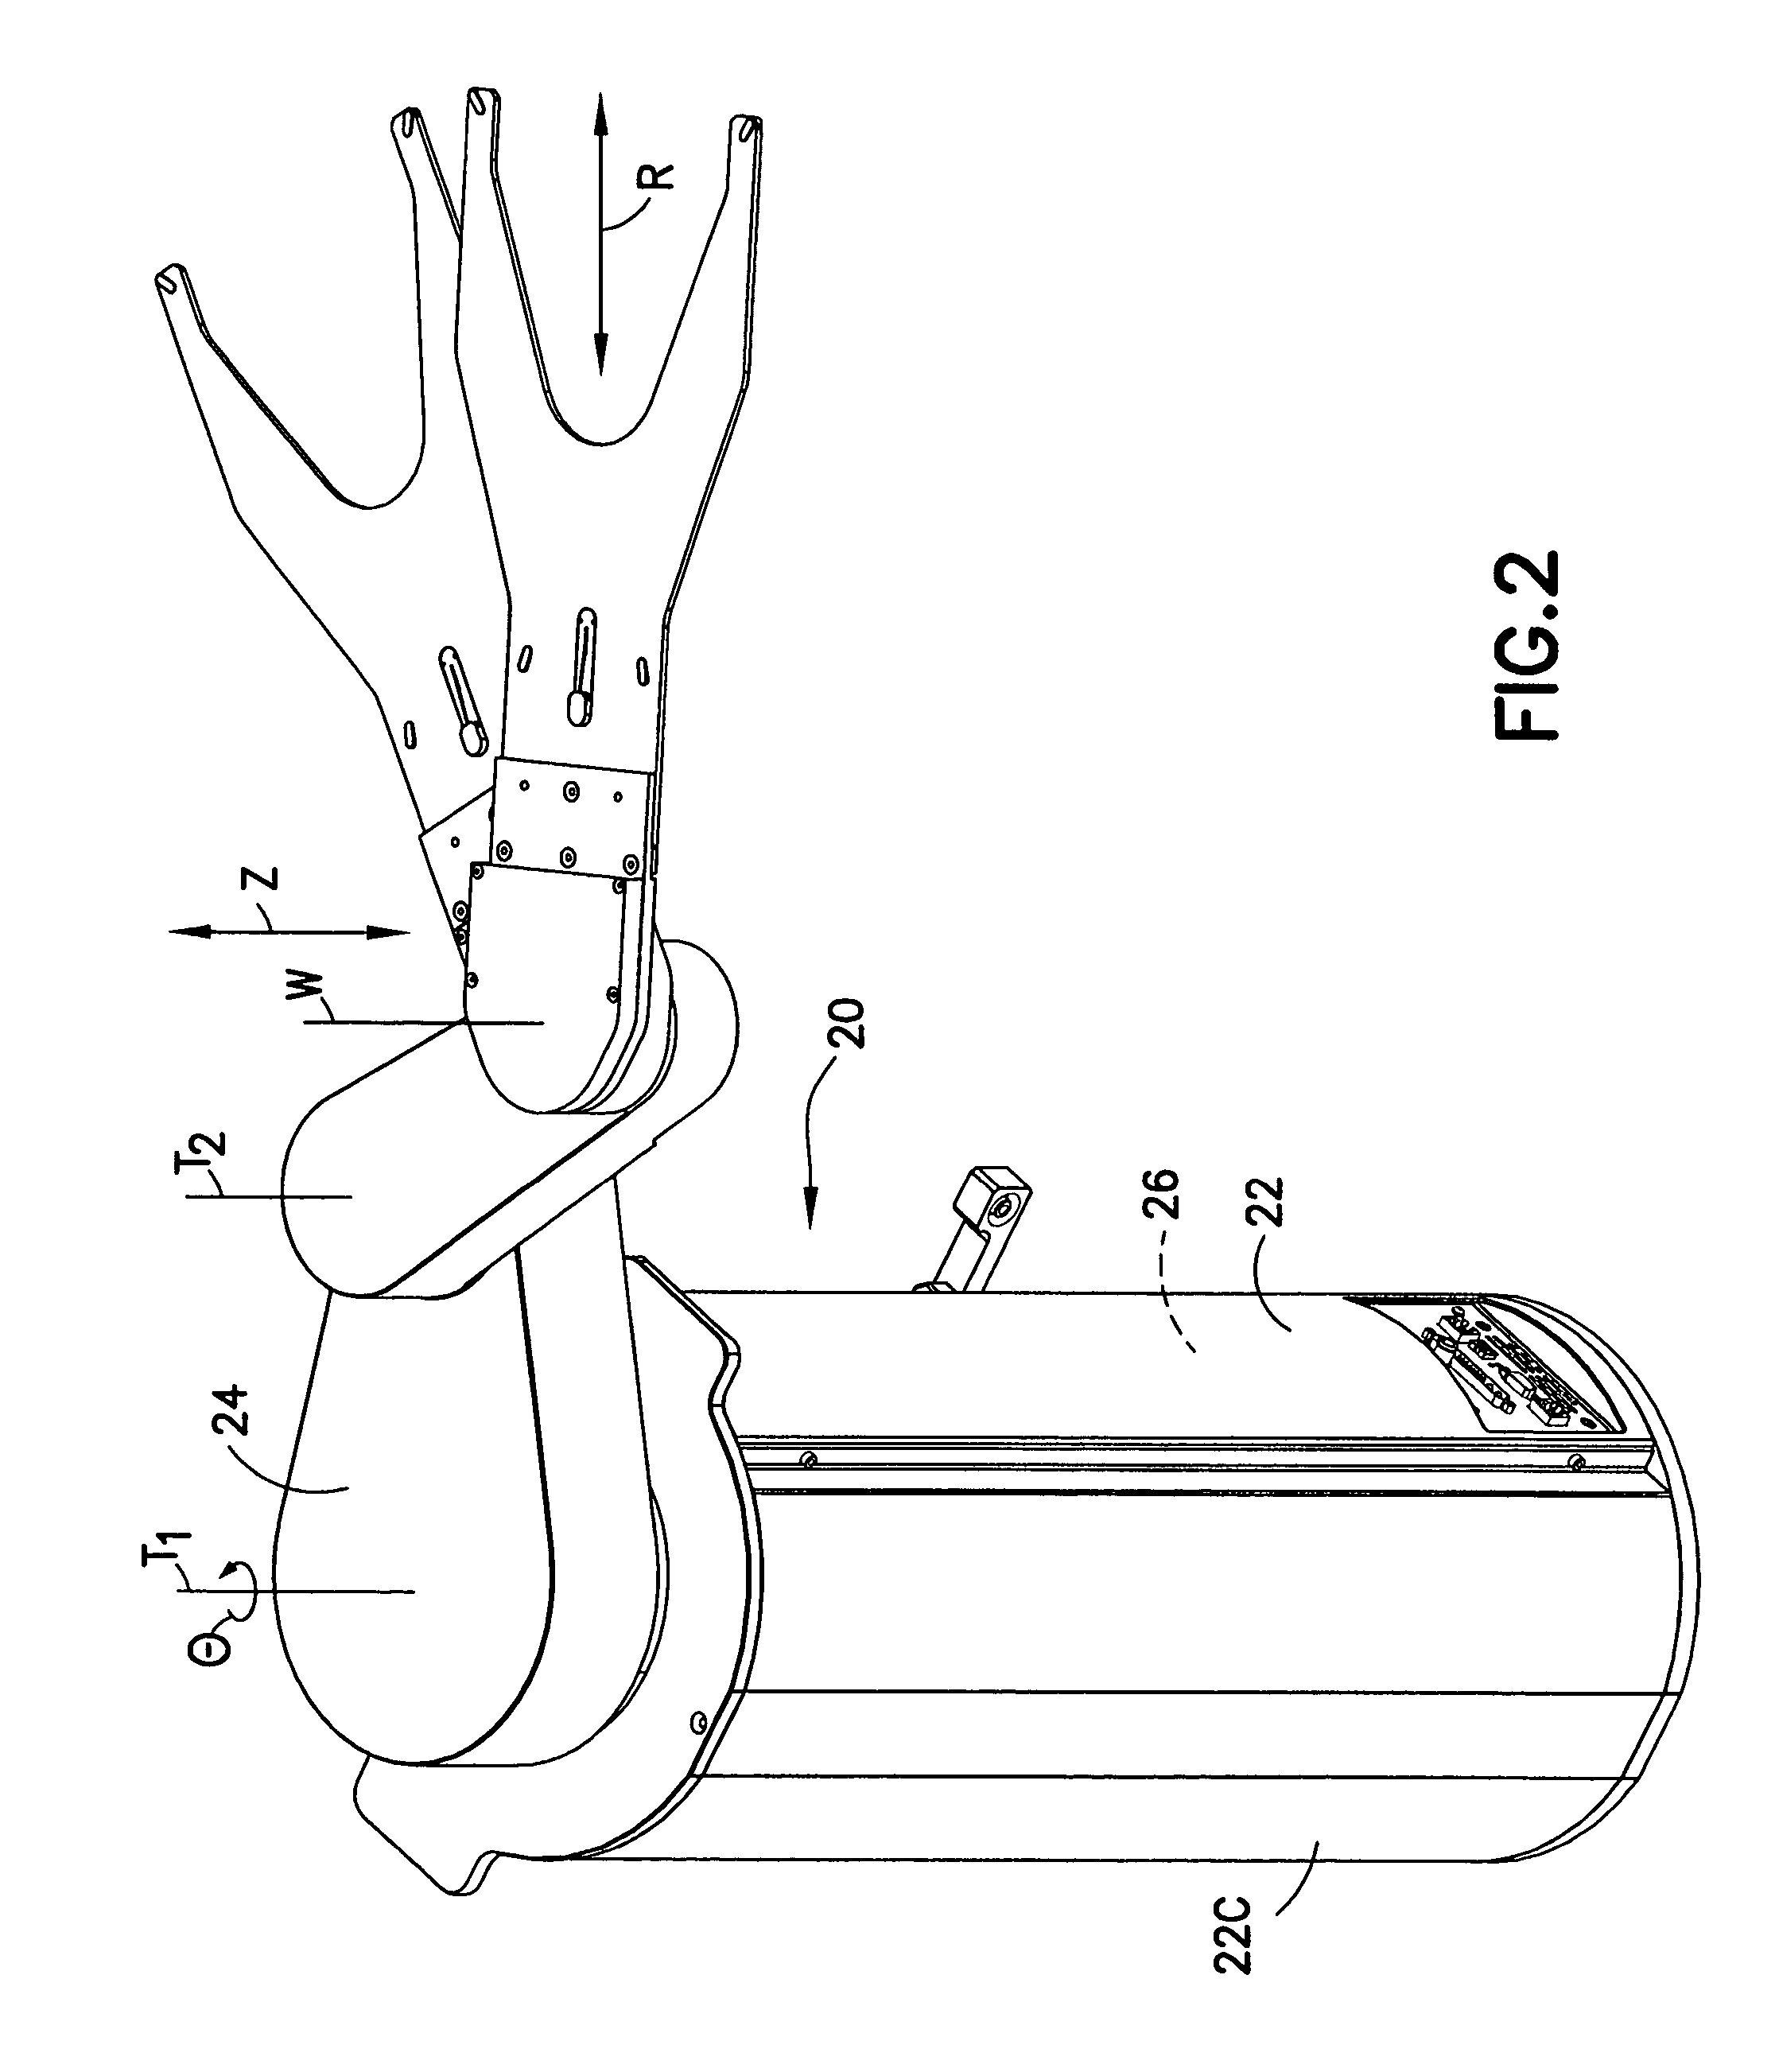 Substrate transport apparatus